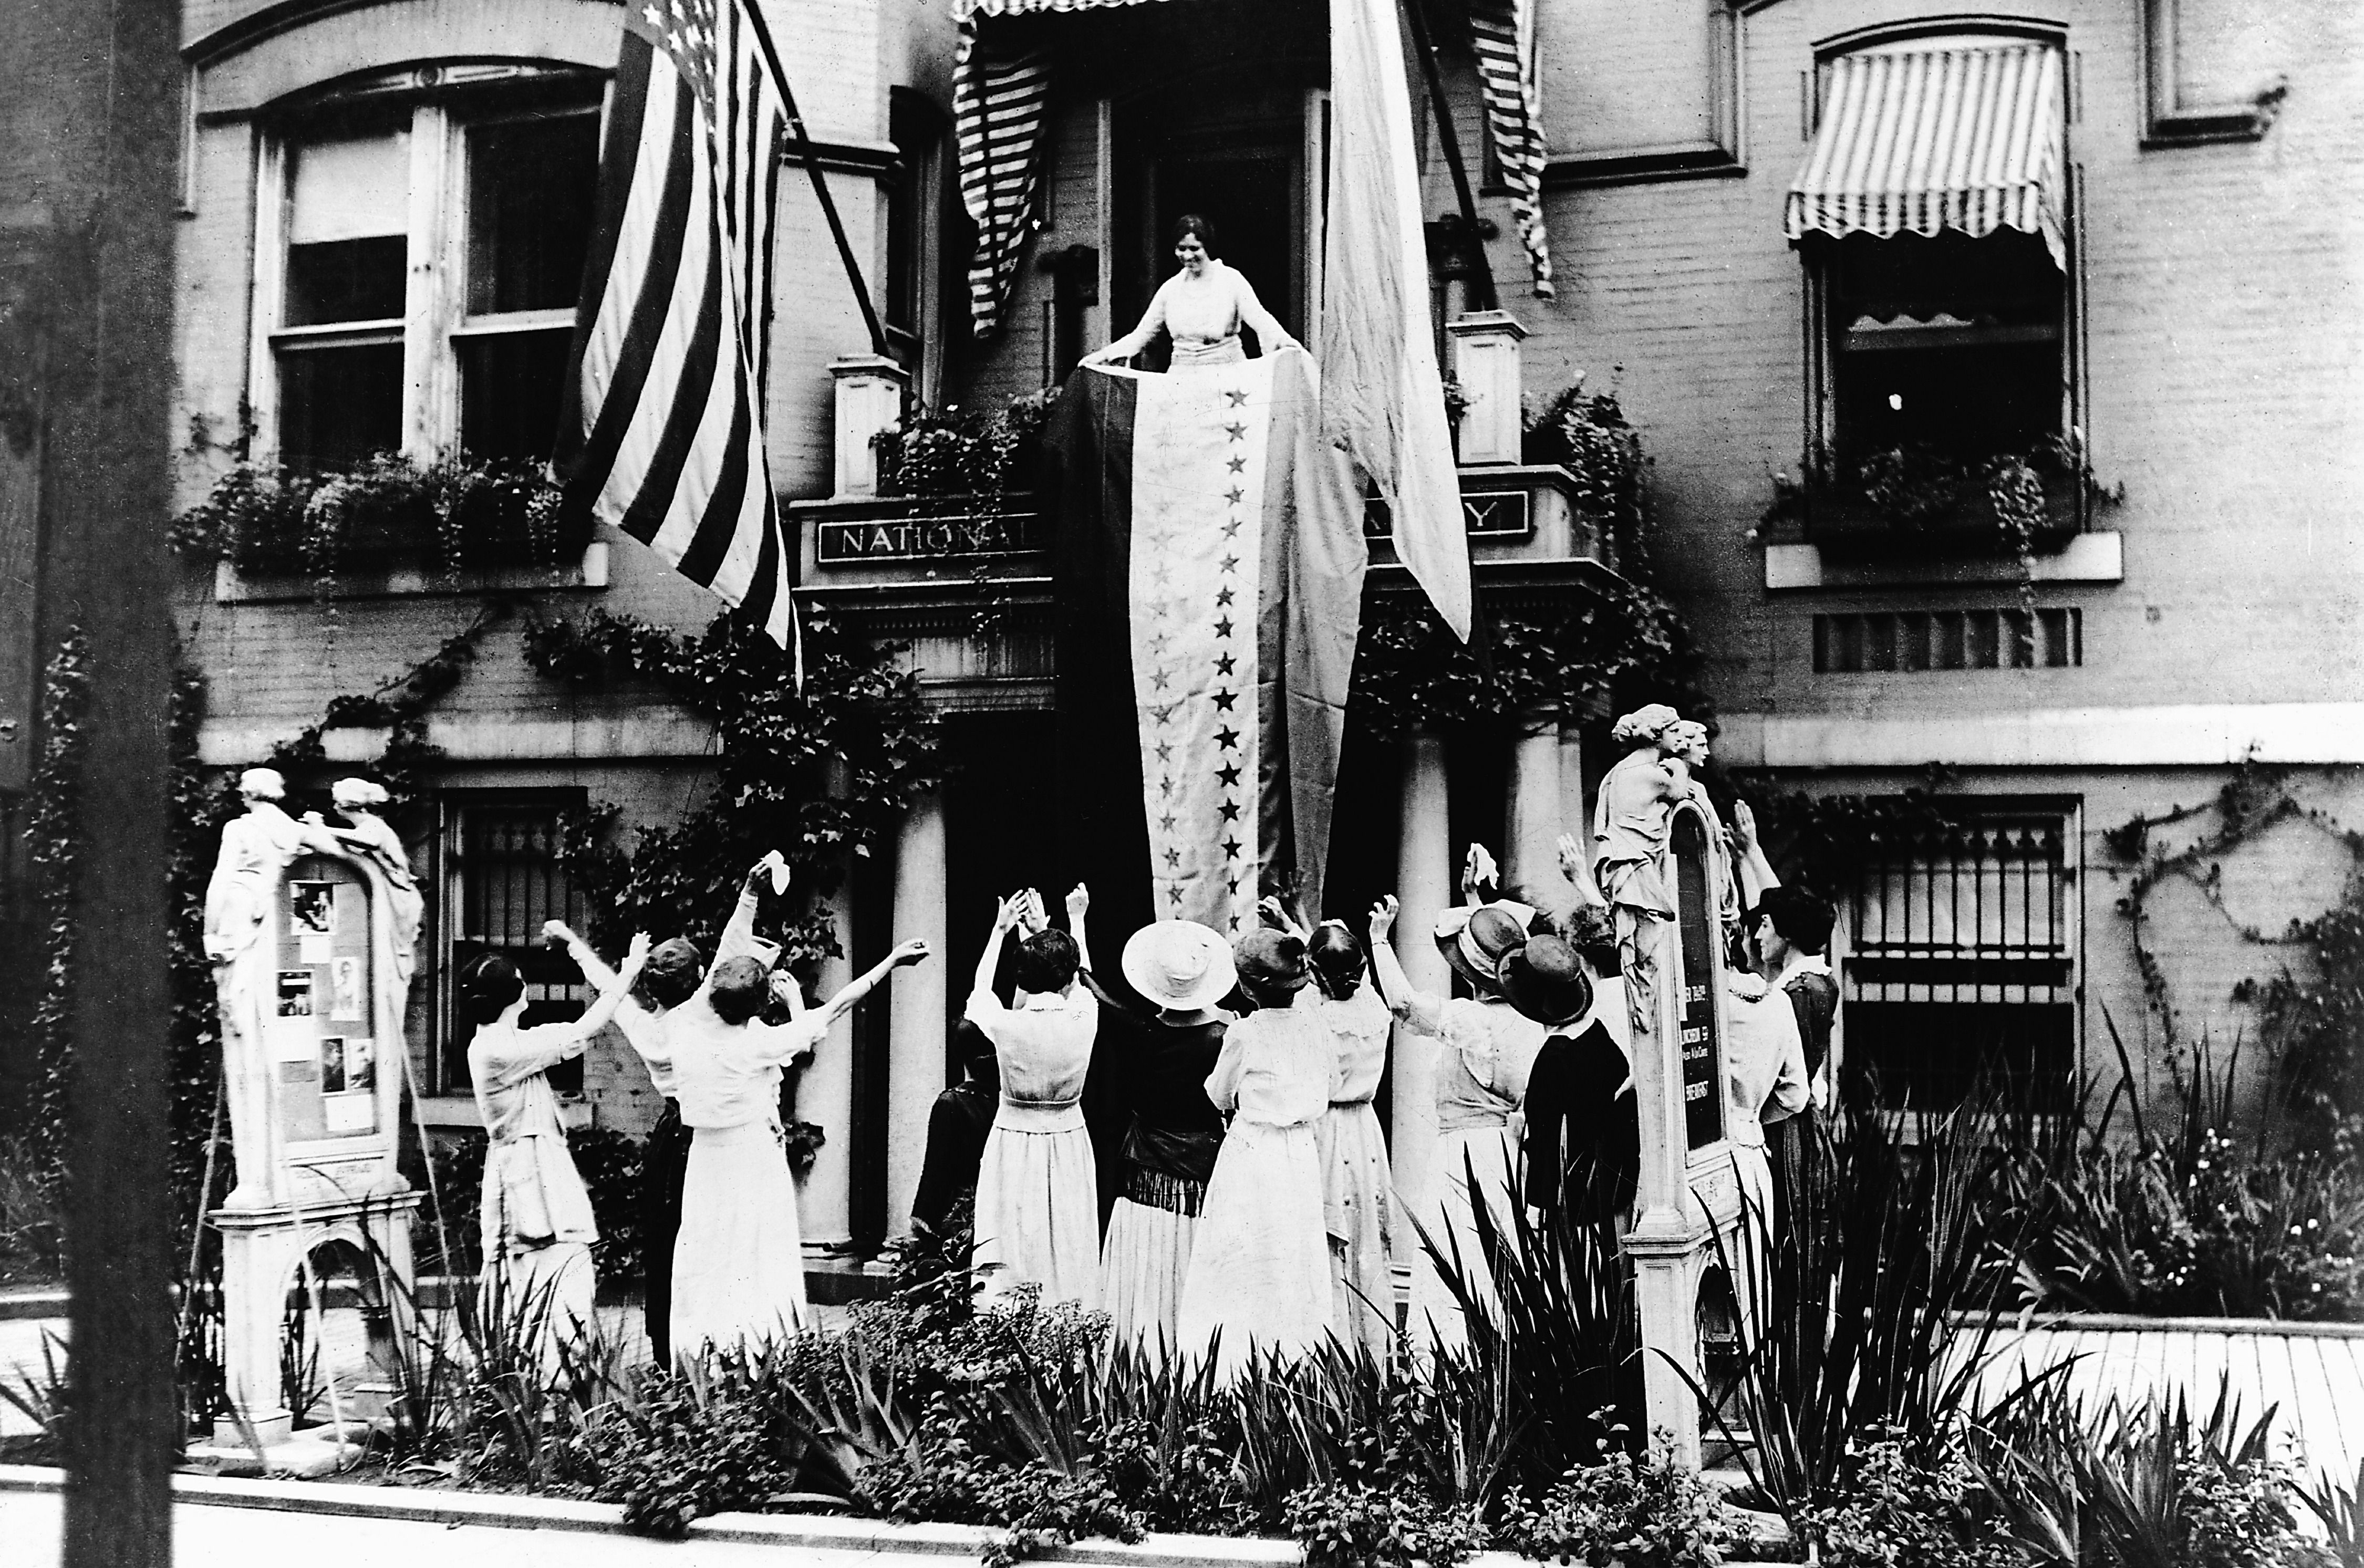 Alice Paul and other women celebrating, 1920 (Universal History Archive—REX—Shutterstock)